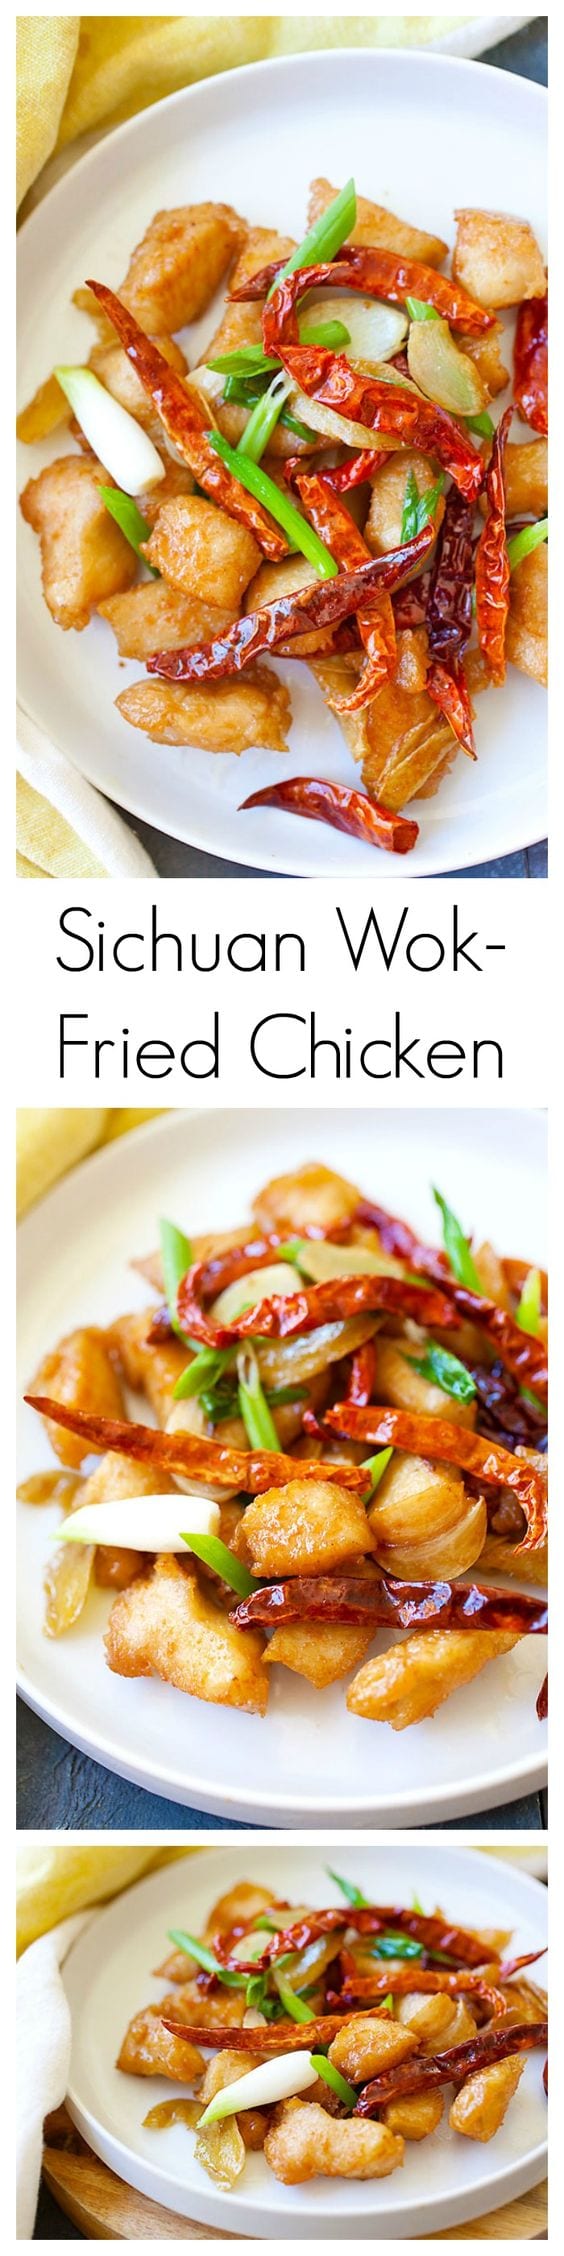 Sichuan wok-fried chicken is a spicy fried chicken dish with ginger, scallion, dried red chilies & Sichuan peppercorn. Amazing and you'll want more. | rasamalaysia.com